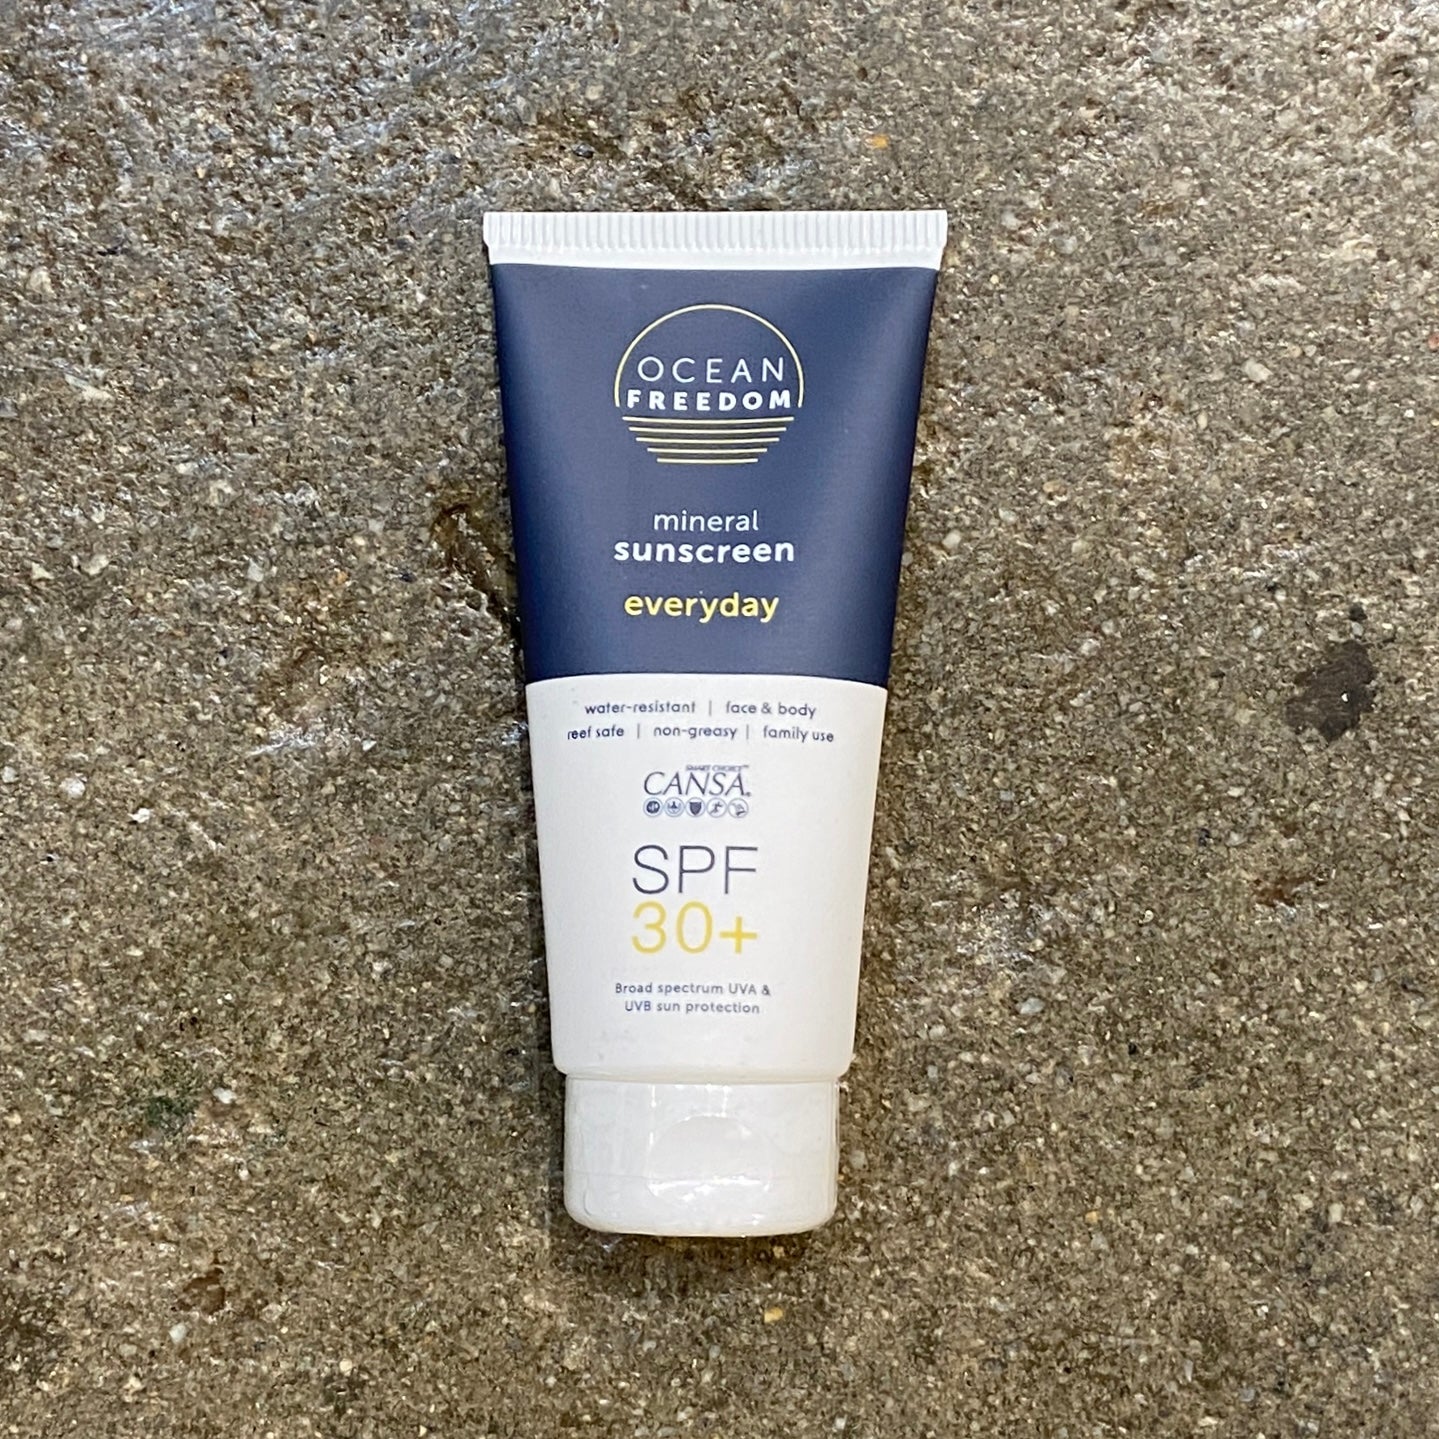 OCEAN FREEDOM EVERYDAY MINERAL SUNSCREEN SPF30+